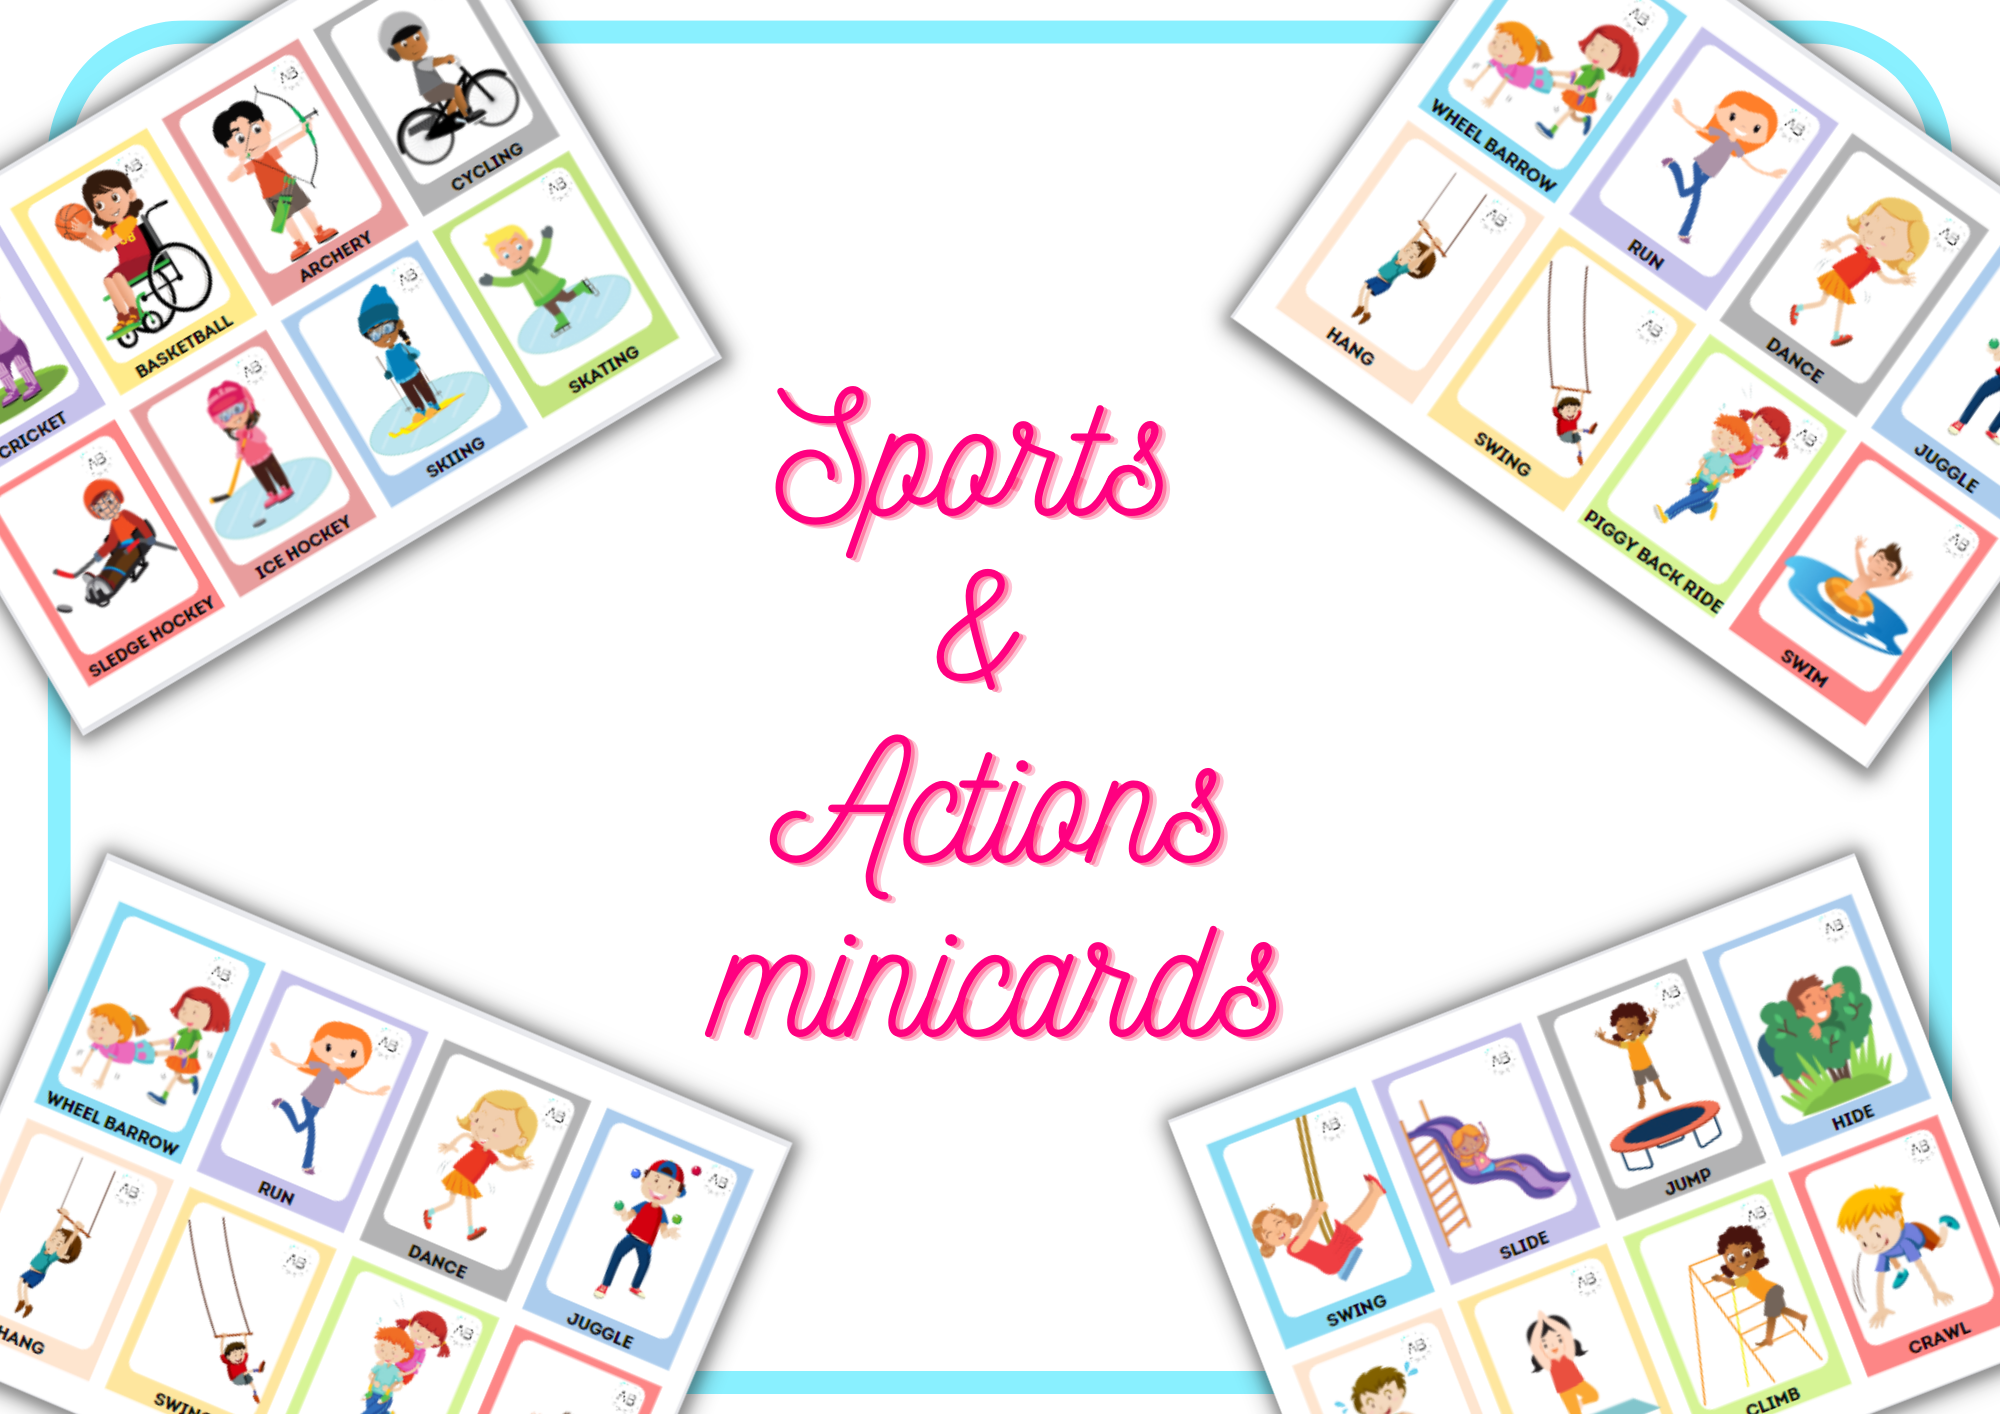 Sports minicards